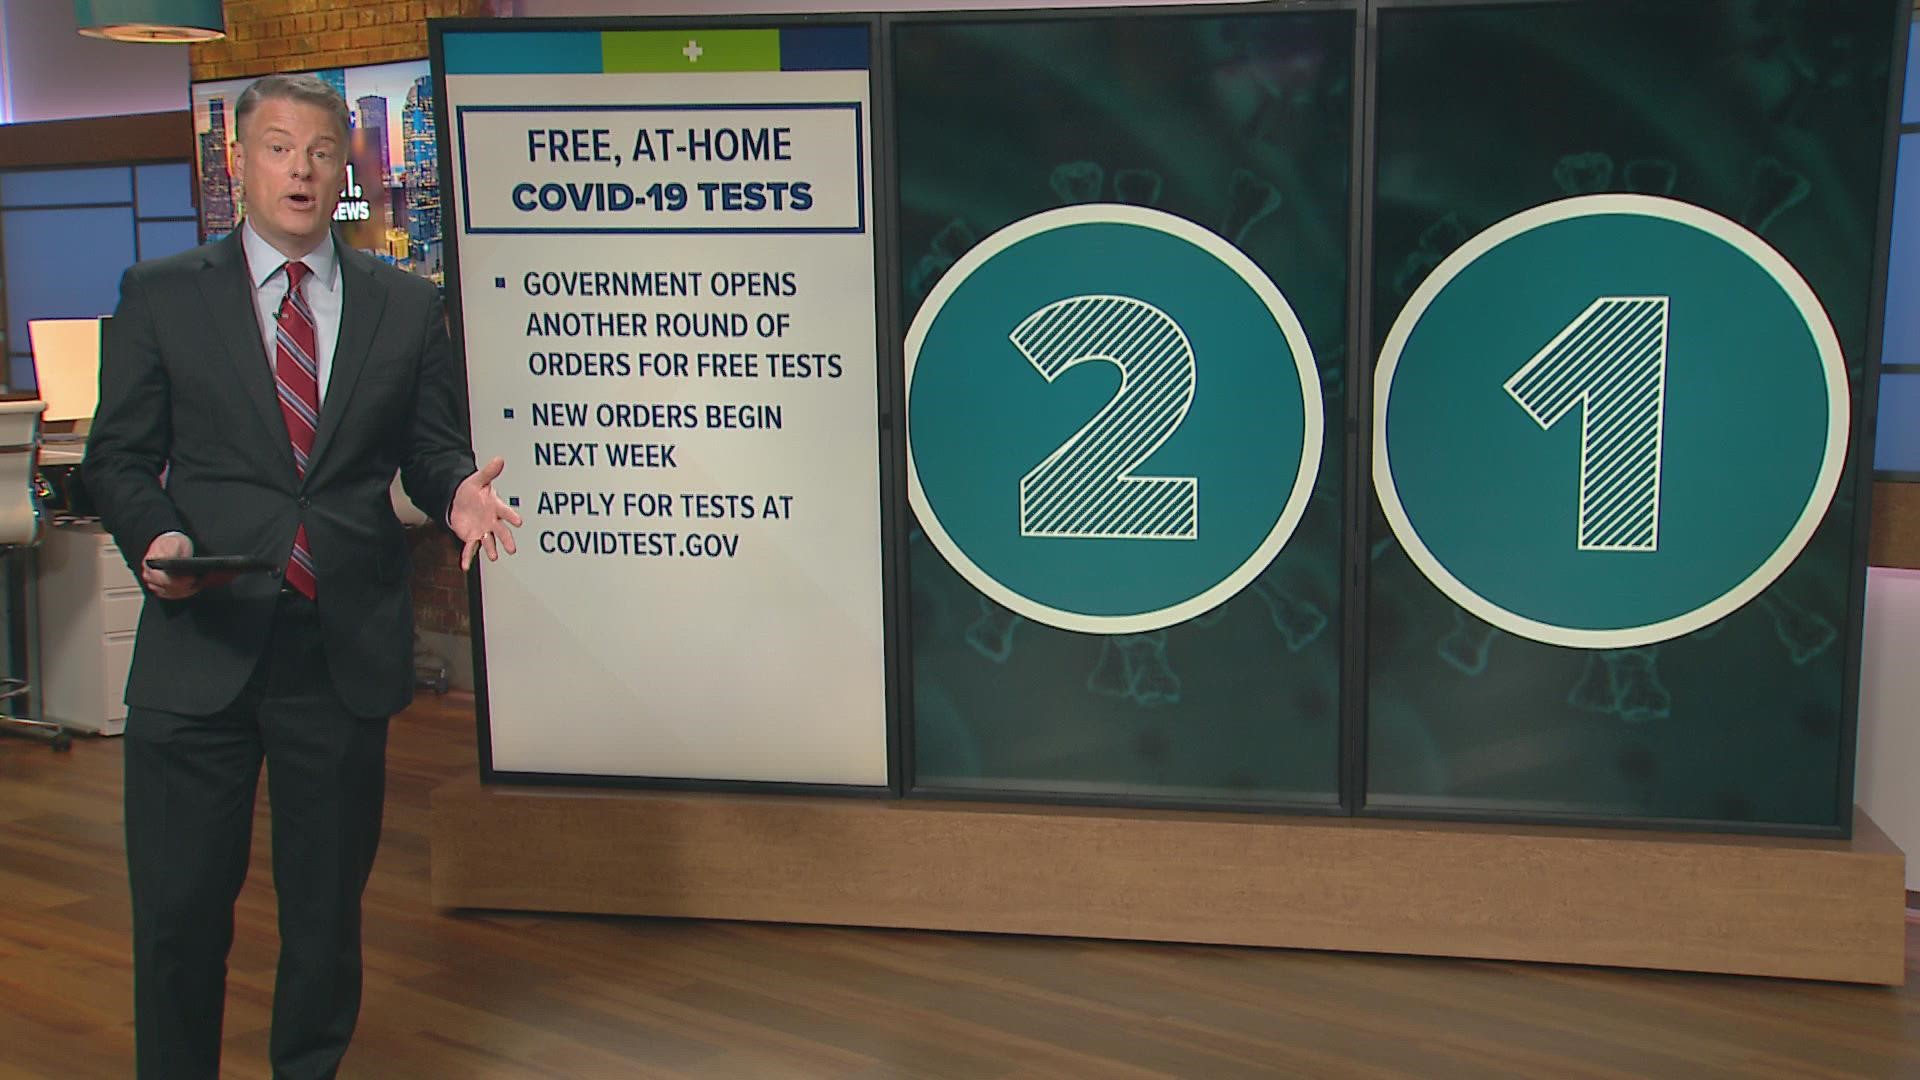 Starting next week, you'll be able to order two sets of the tests through the U.S. government.